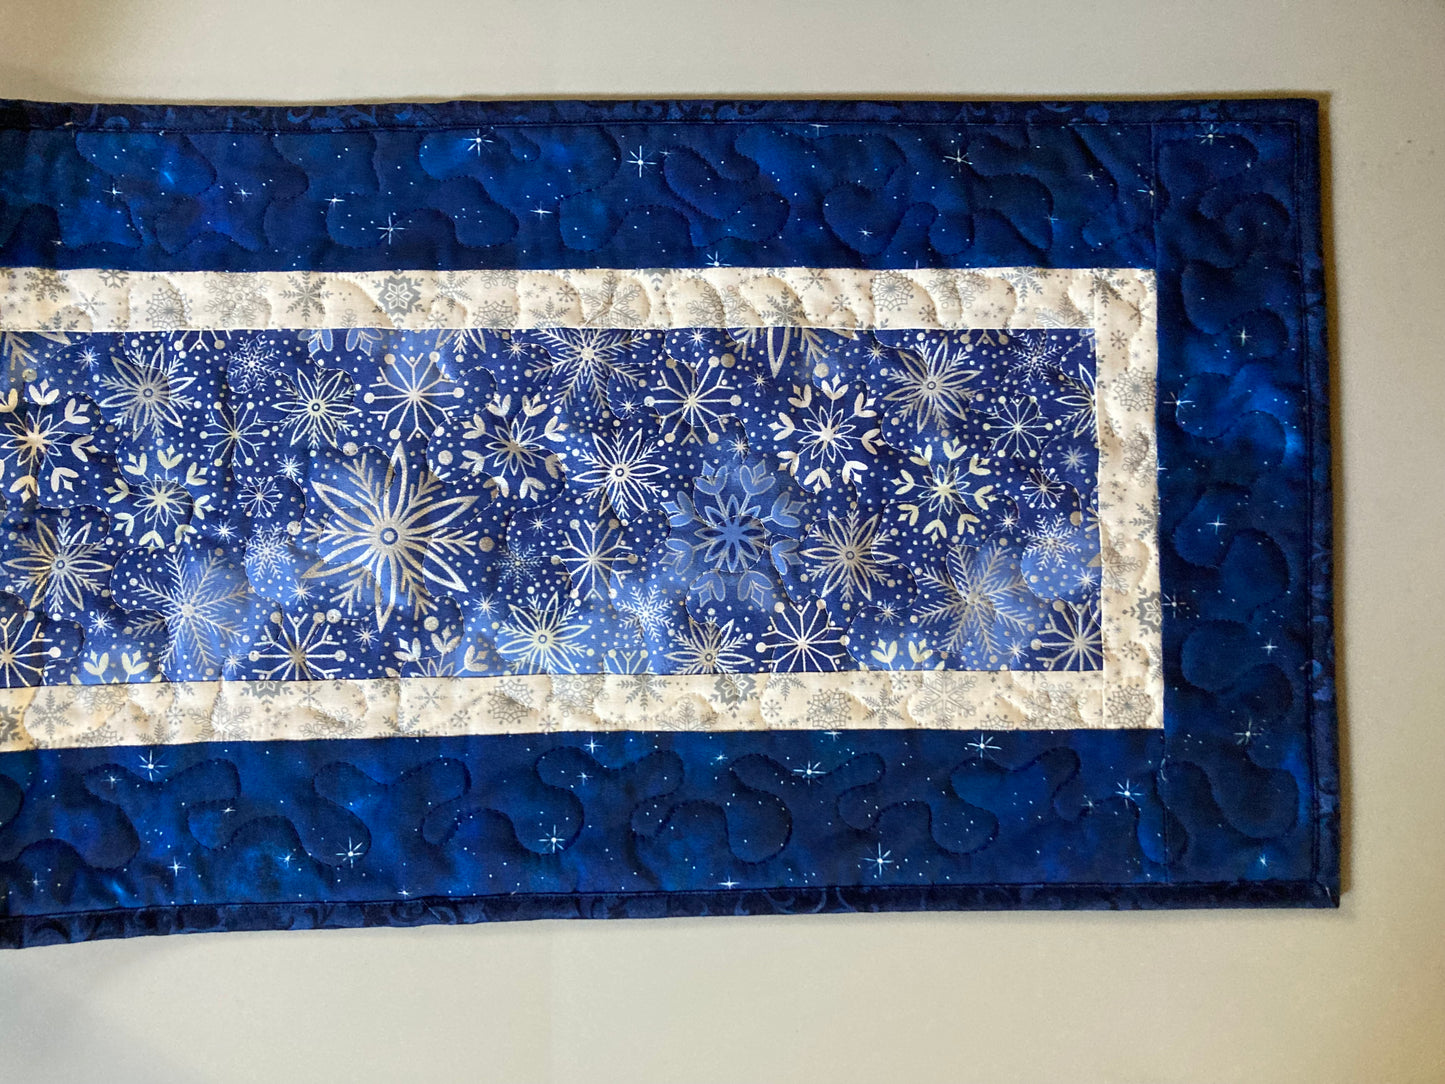 Blue Silver Snowflakes Winter Table Runner Quilted 13x48", Hanukkah Reversible Dining Coffee Table, Holiday Dresser Scarf Square